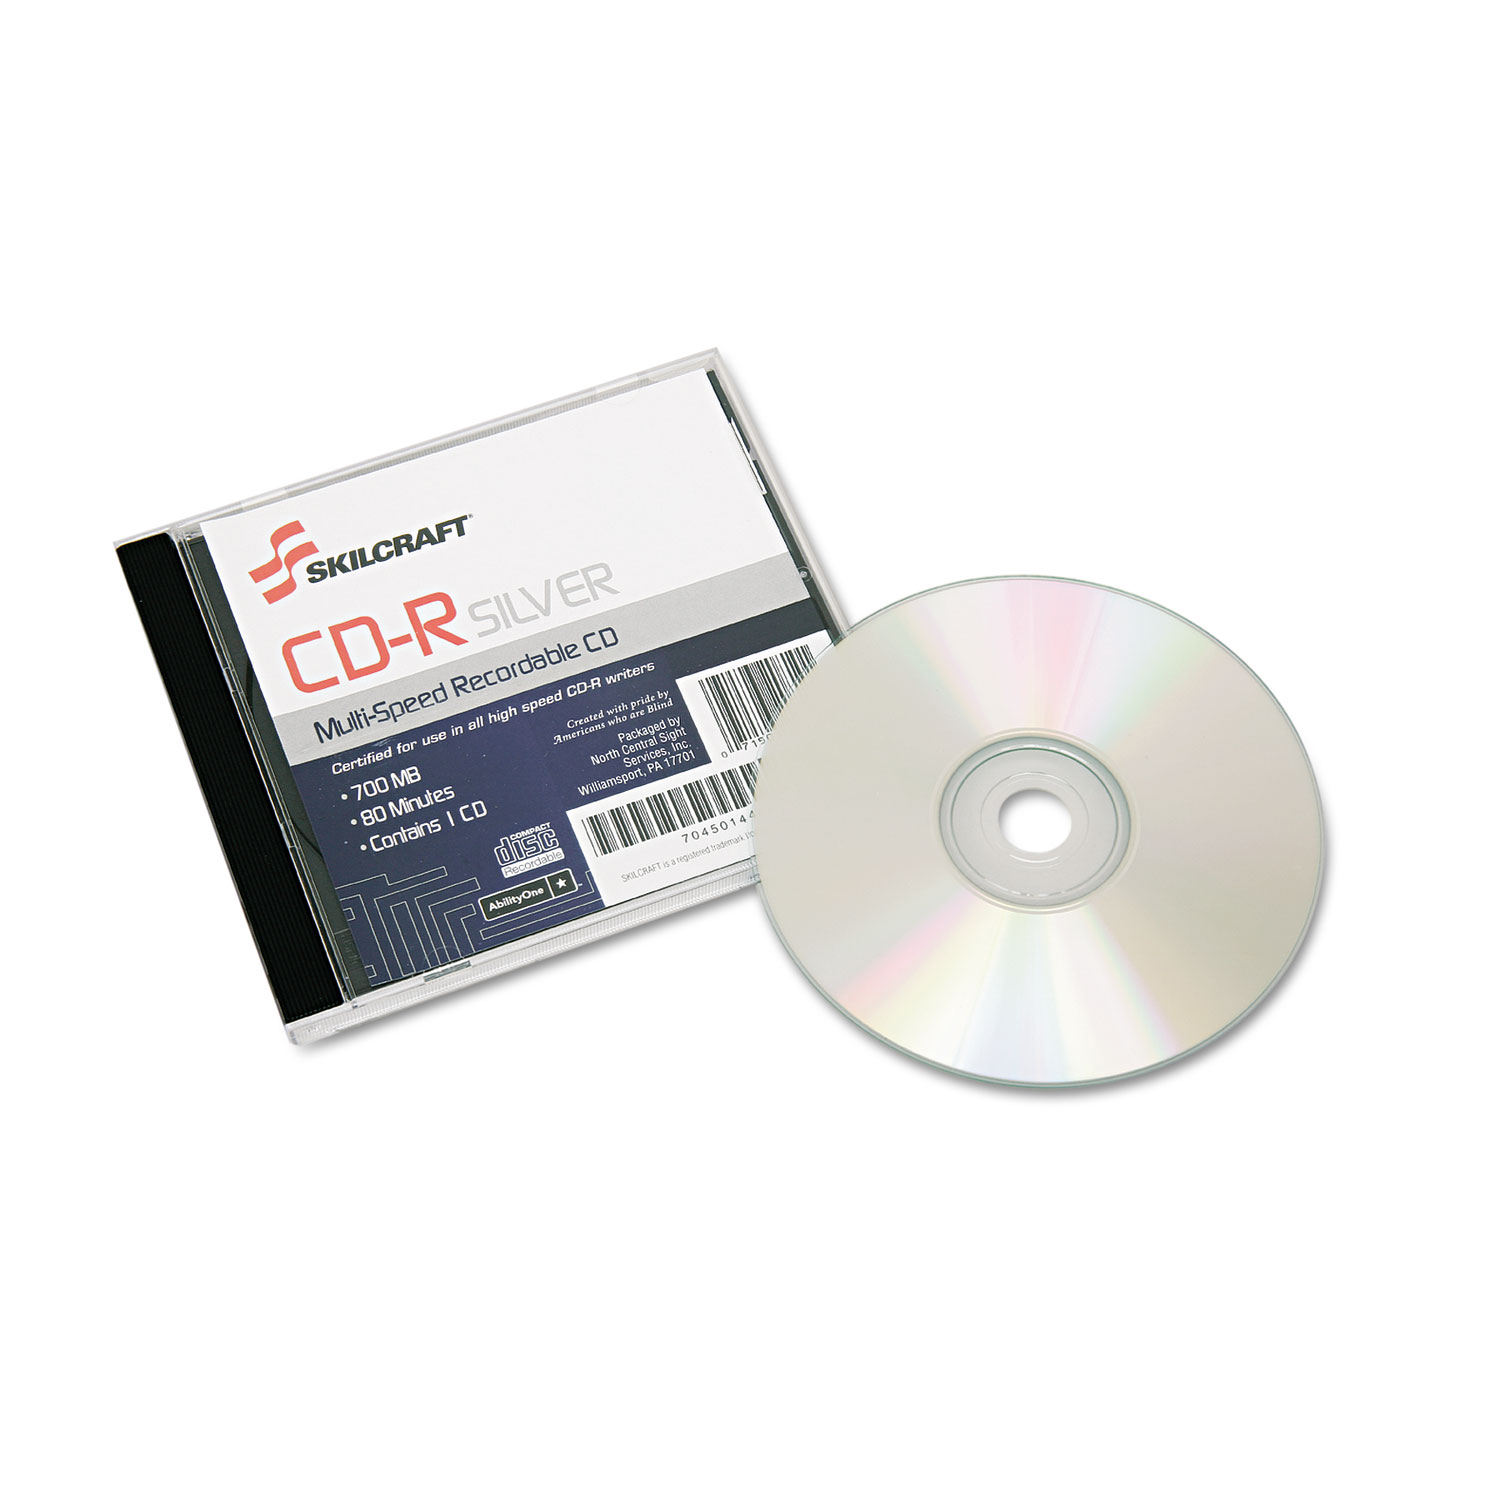 21 Minute Silver Mini CD-R W Sleeve 100 Count